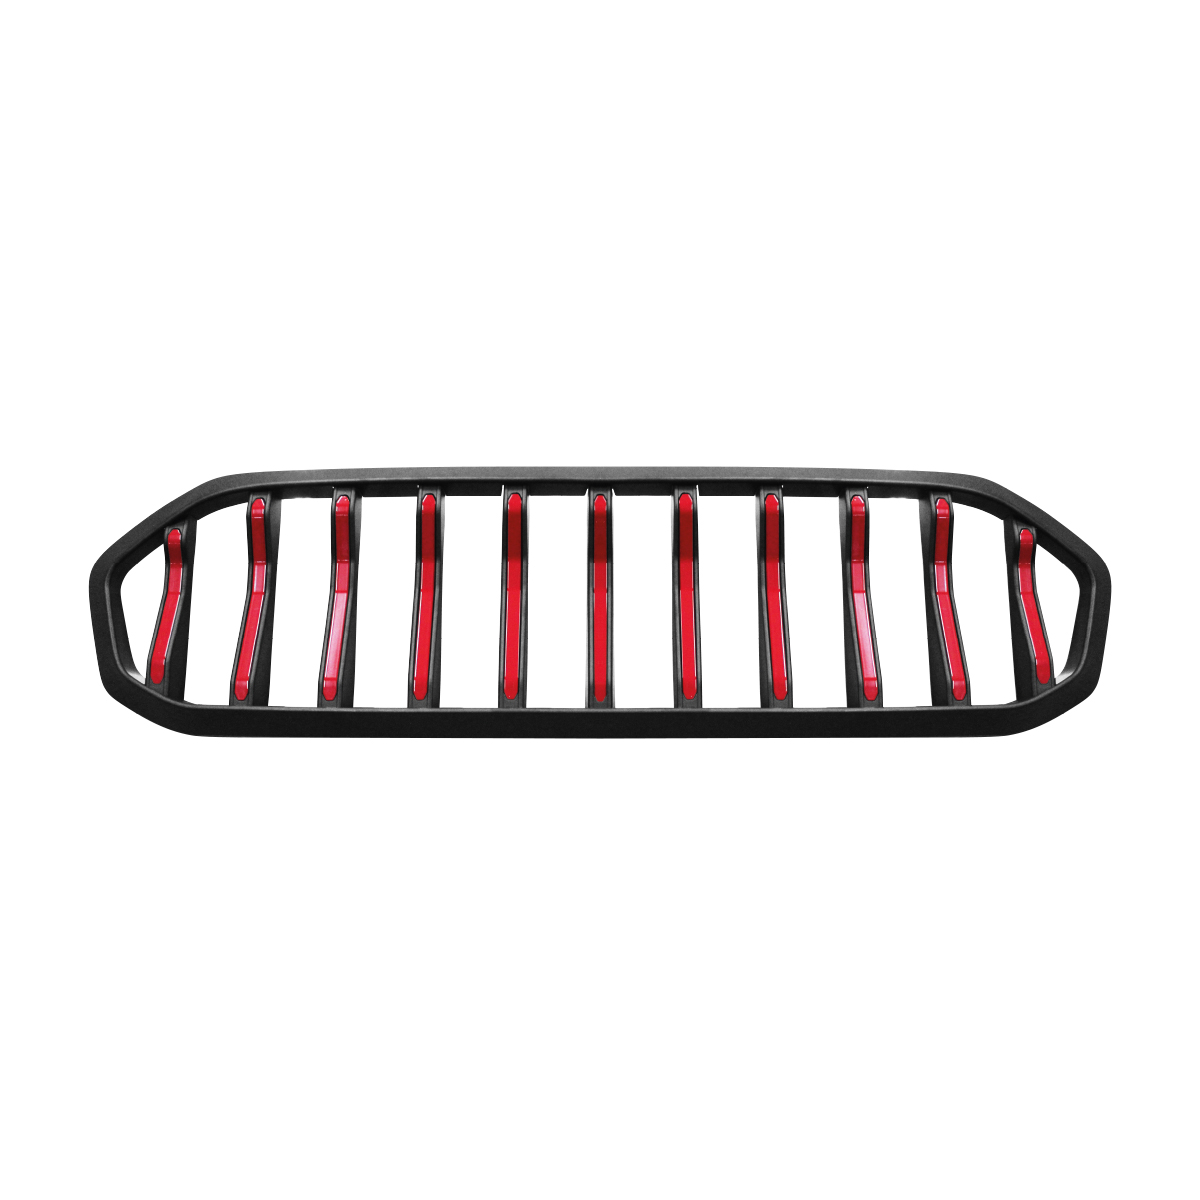 RANGER 2019 BLACK AND RED DEBADGED GRILL